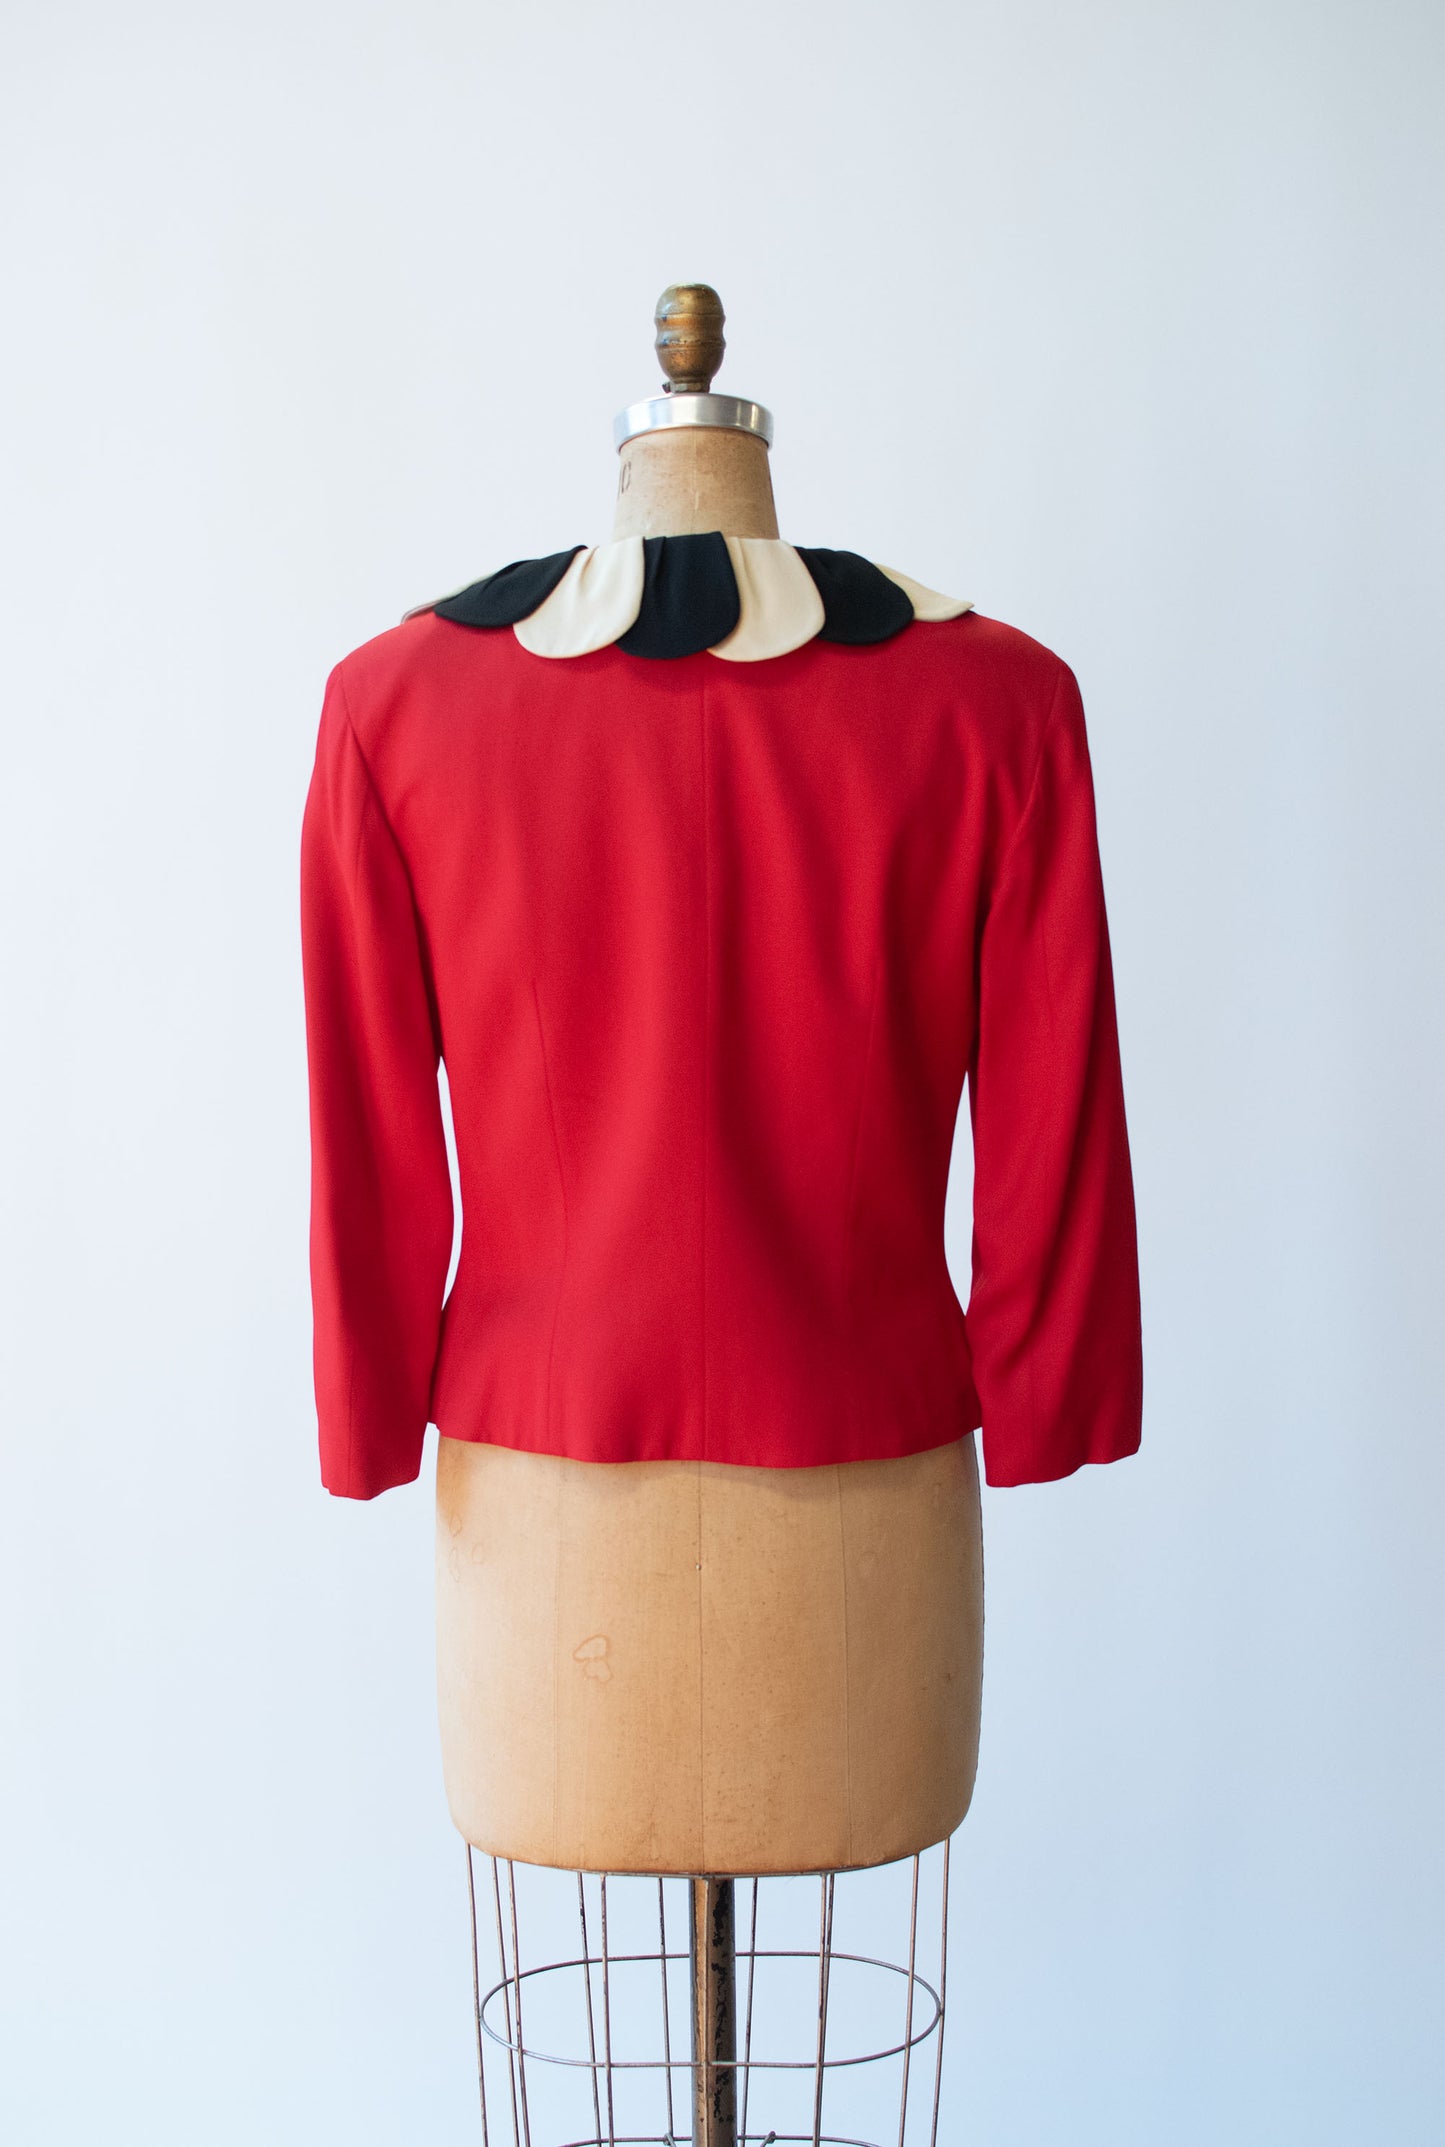 Petal Collar Red Jacket | Moschino Cheap & Chic